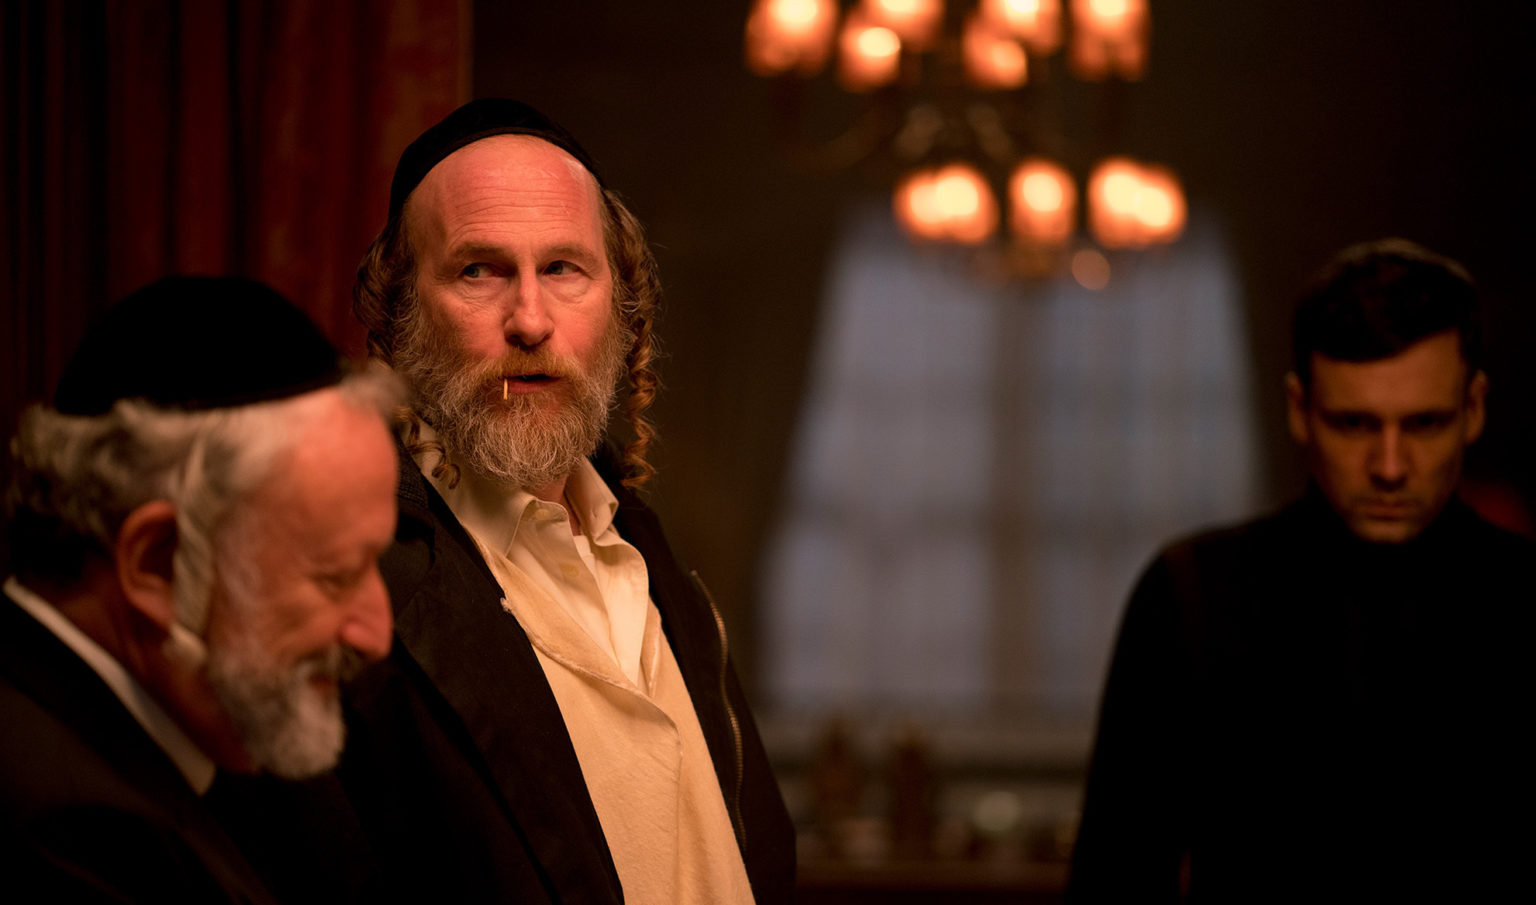 The Offering (2022) Film Review Hasidic Horrors Haunt a Brooklyn Family